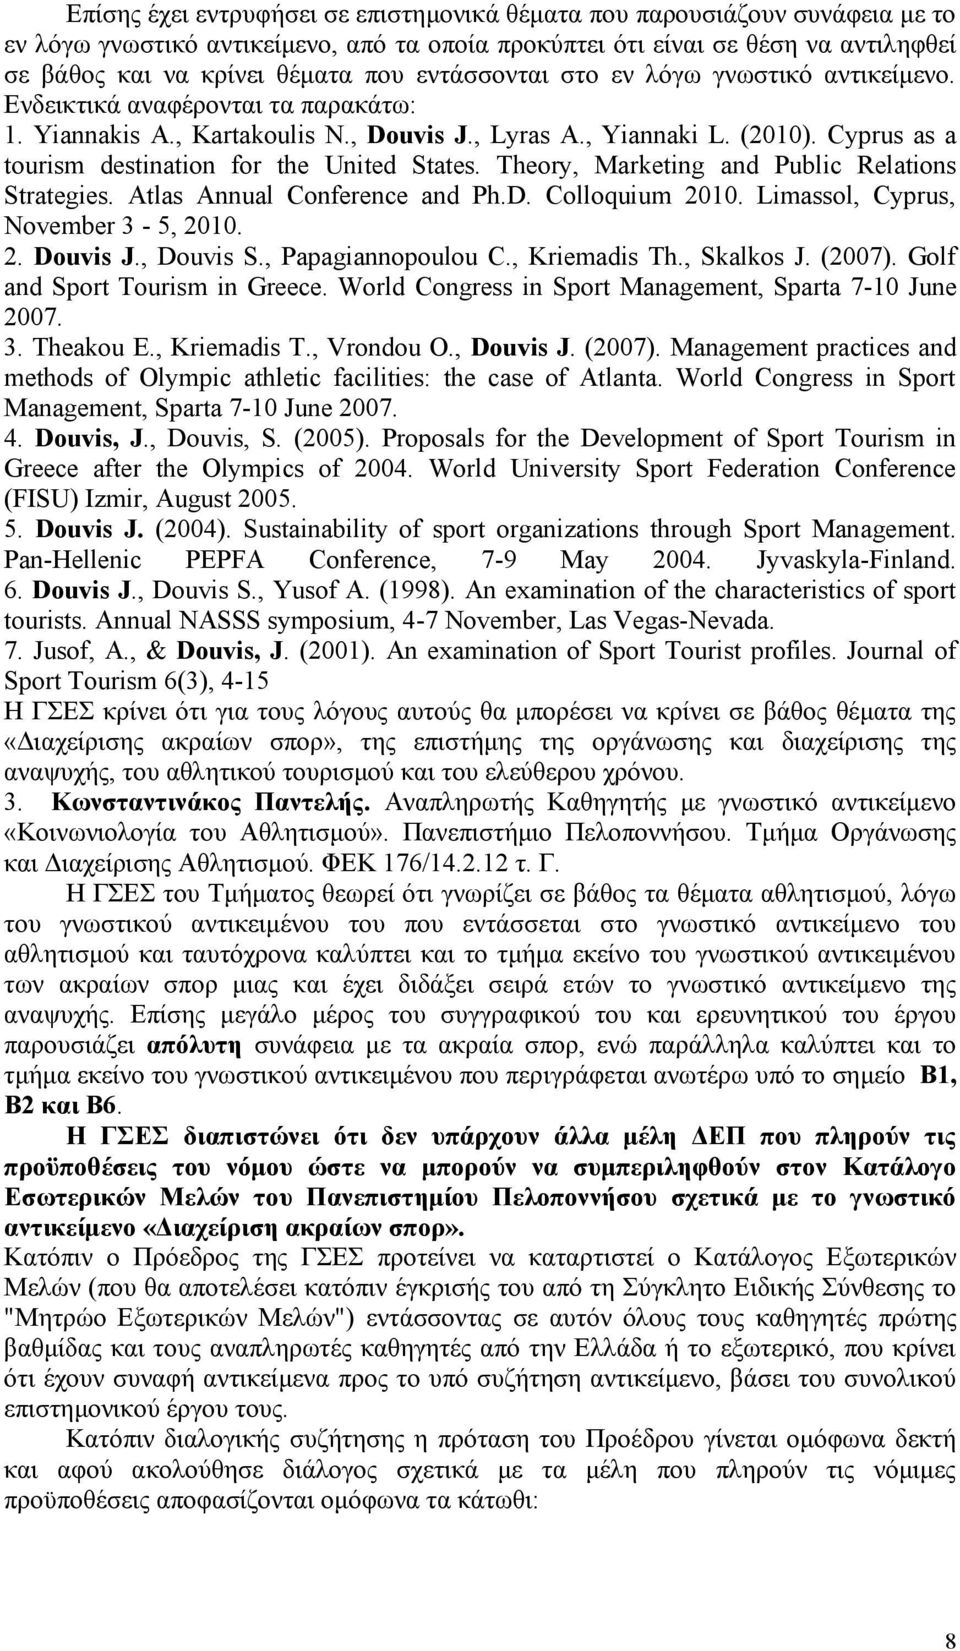 , Douvis S., Papagiannopoulou C., Kriemadis Th., Skalkos J. (2007). Golf and Sport Tourism in Greece. World Congress in Sport Management, Sparta 7-10 June 2007. 3. Theakou E., Kriemadis T., Vrondou O.